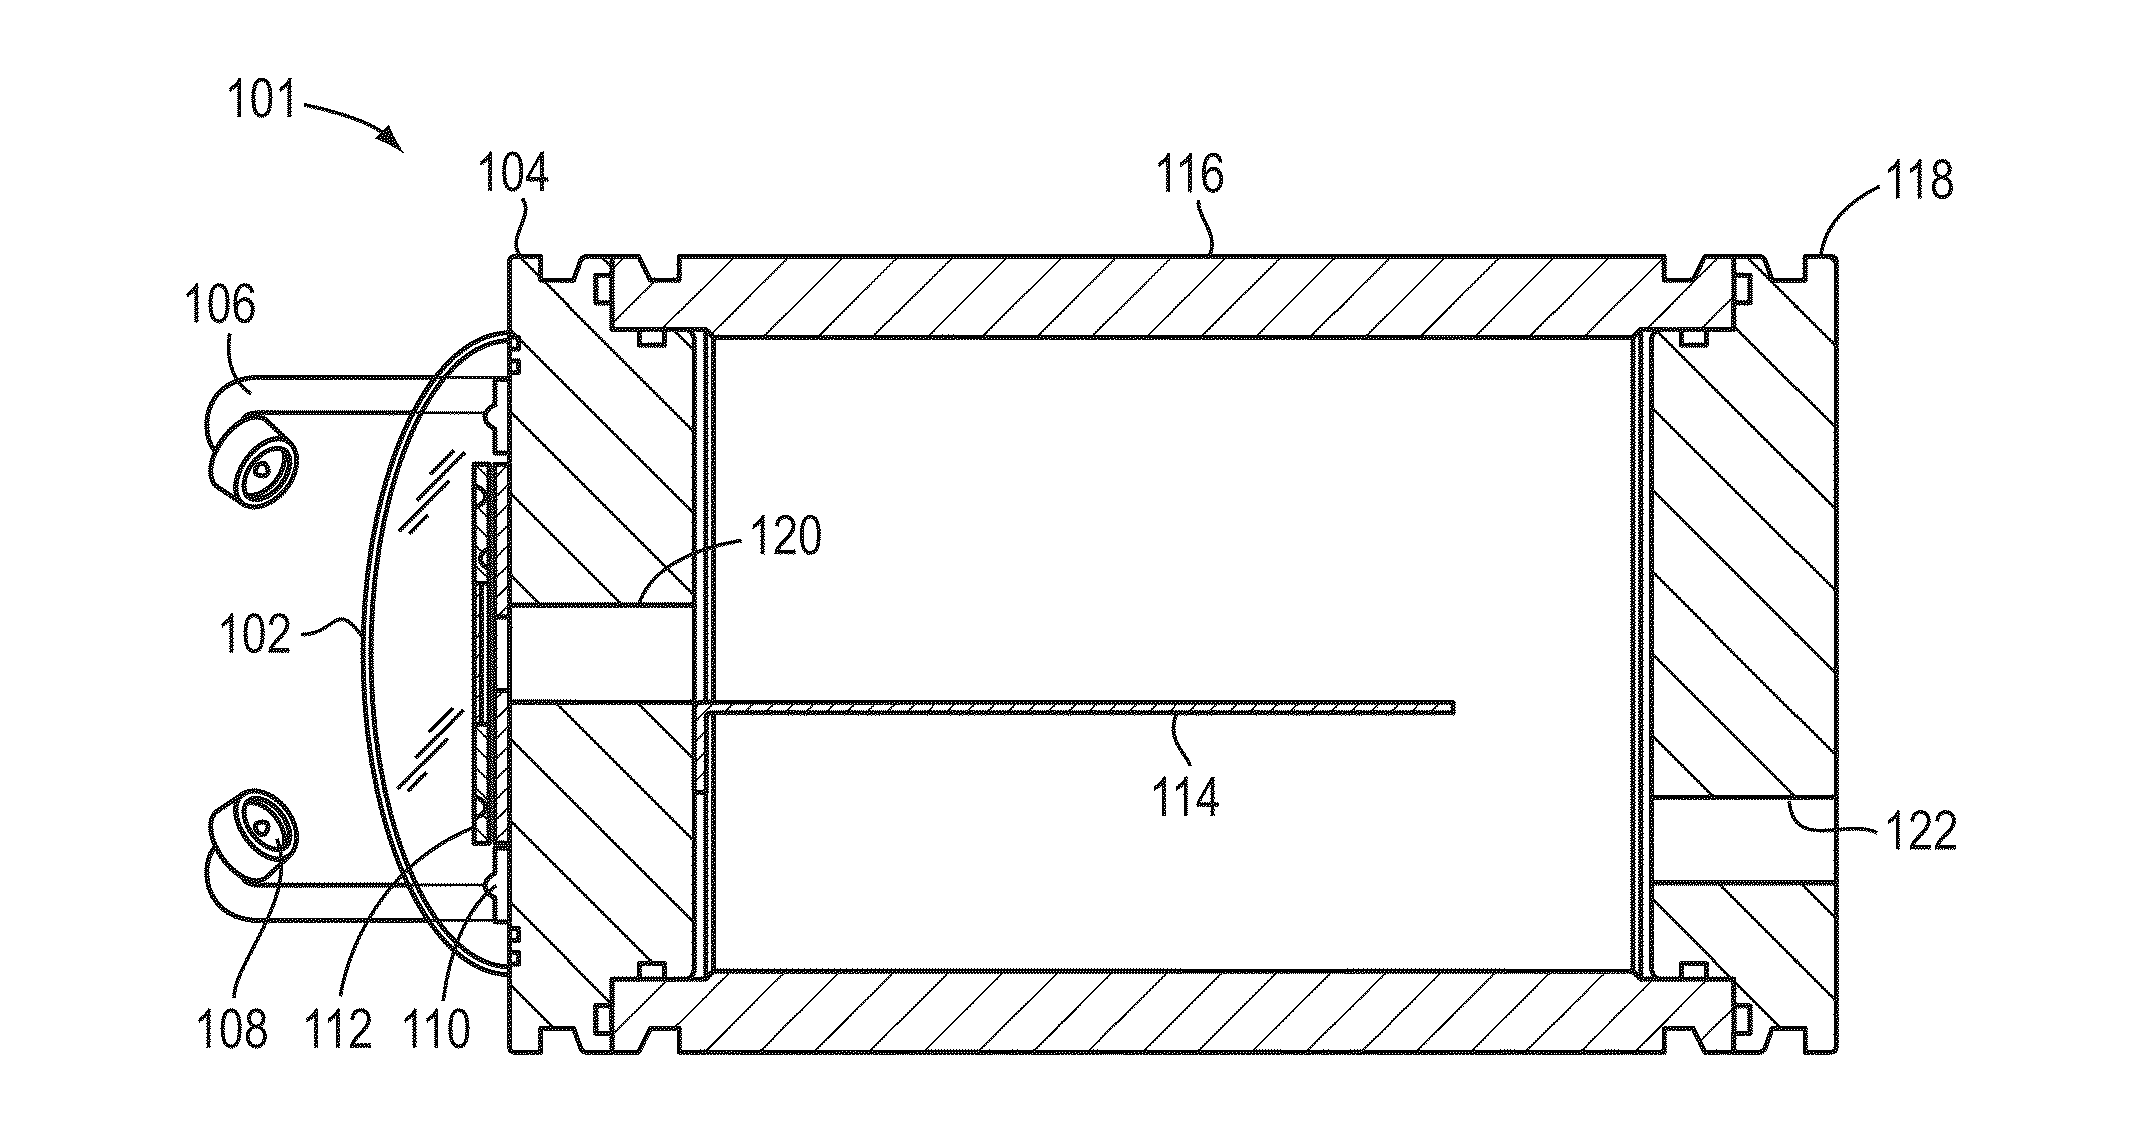 Marine environment antifouling system and methods